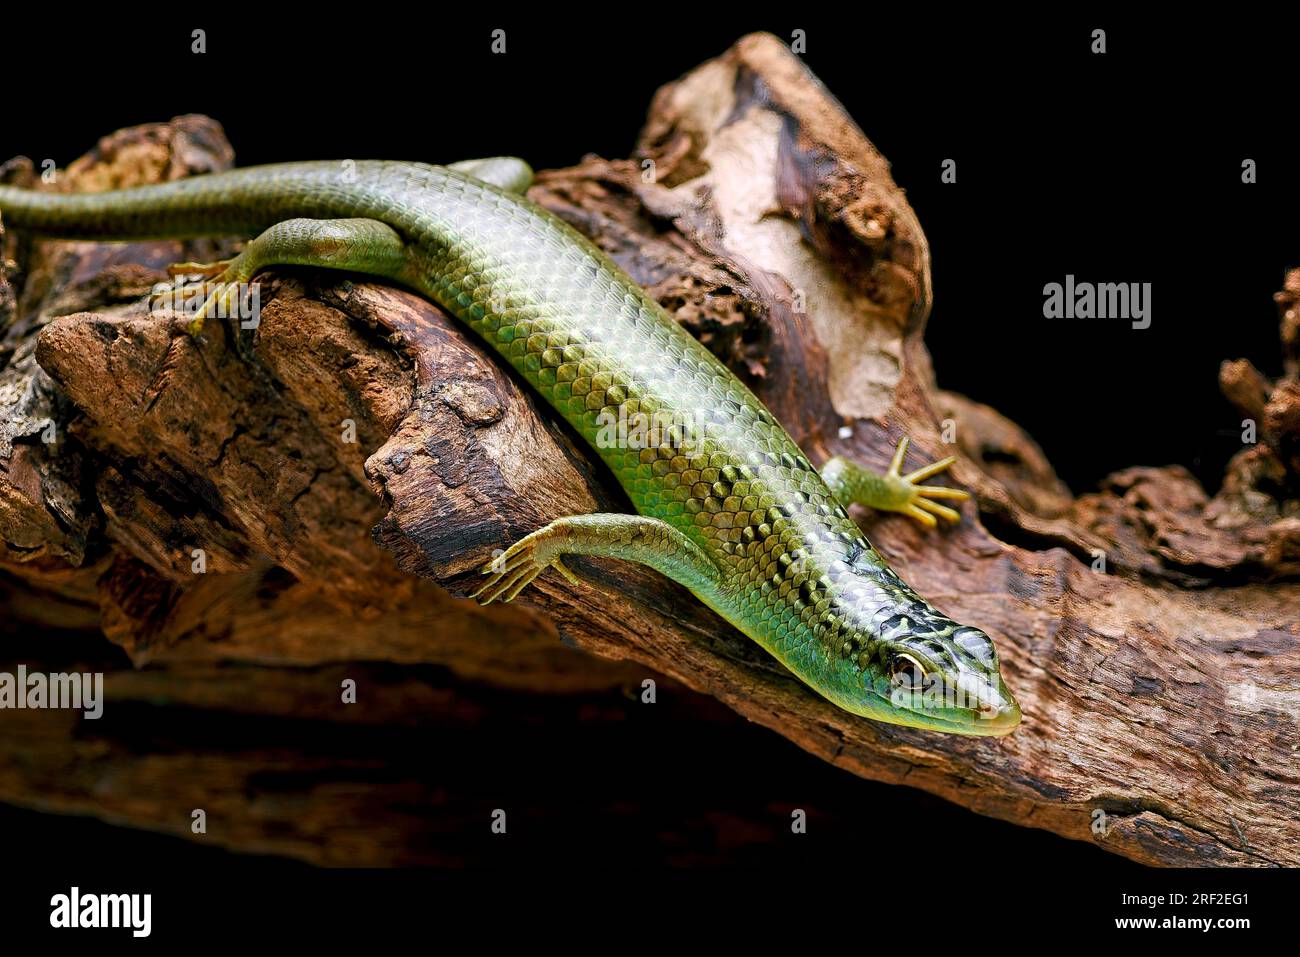 Olive tree skink on a rock Stock Photo